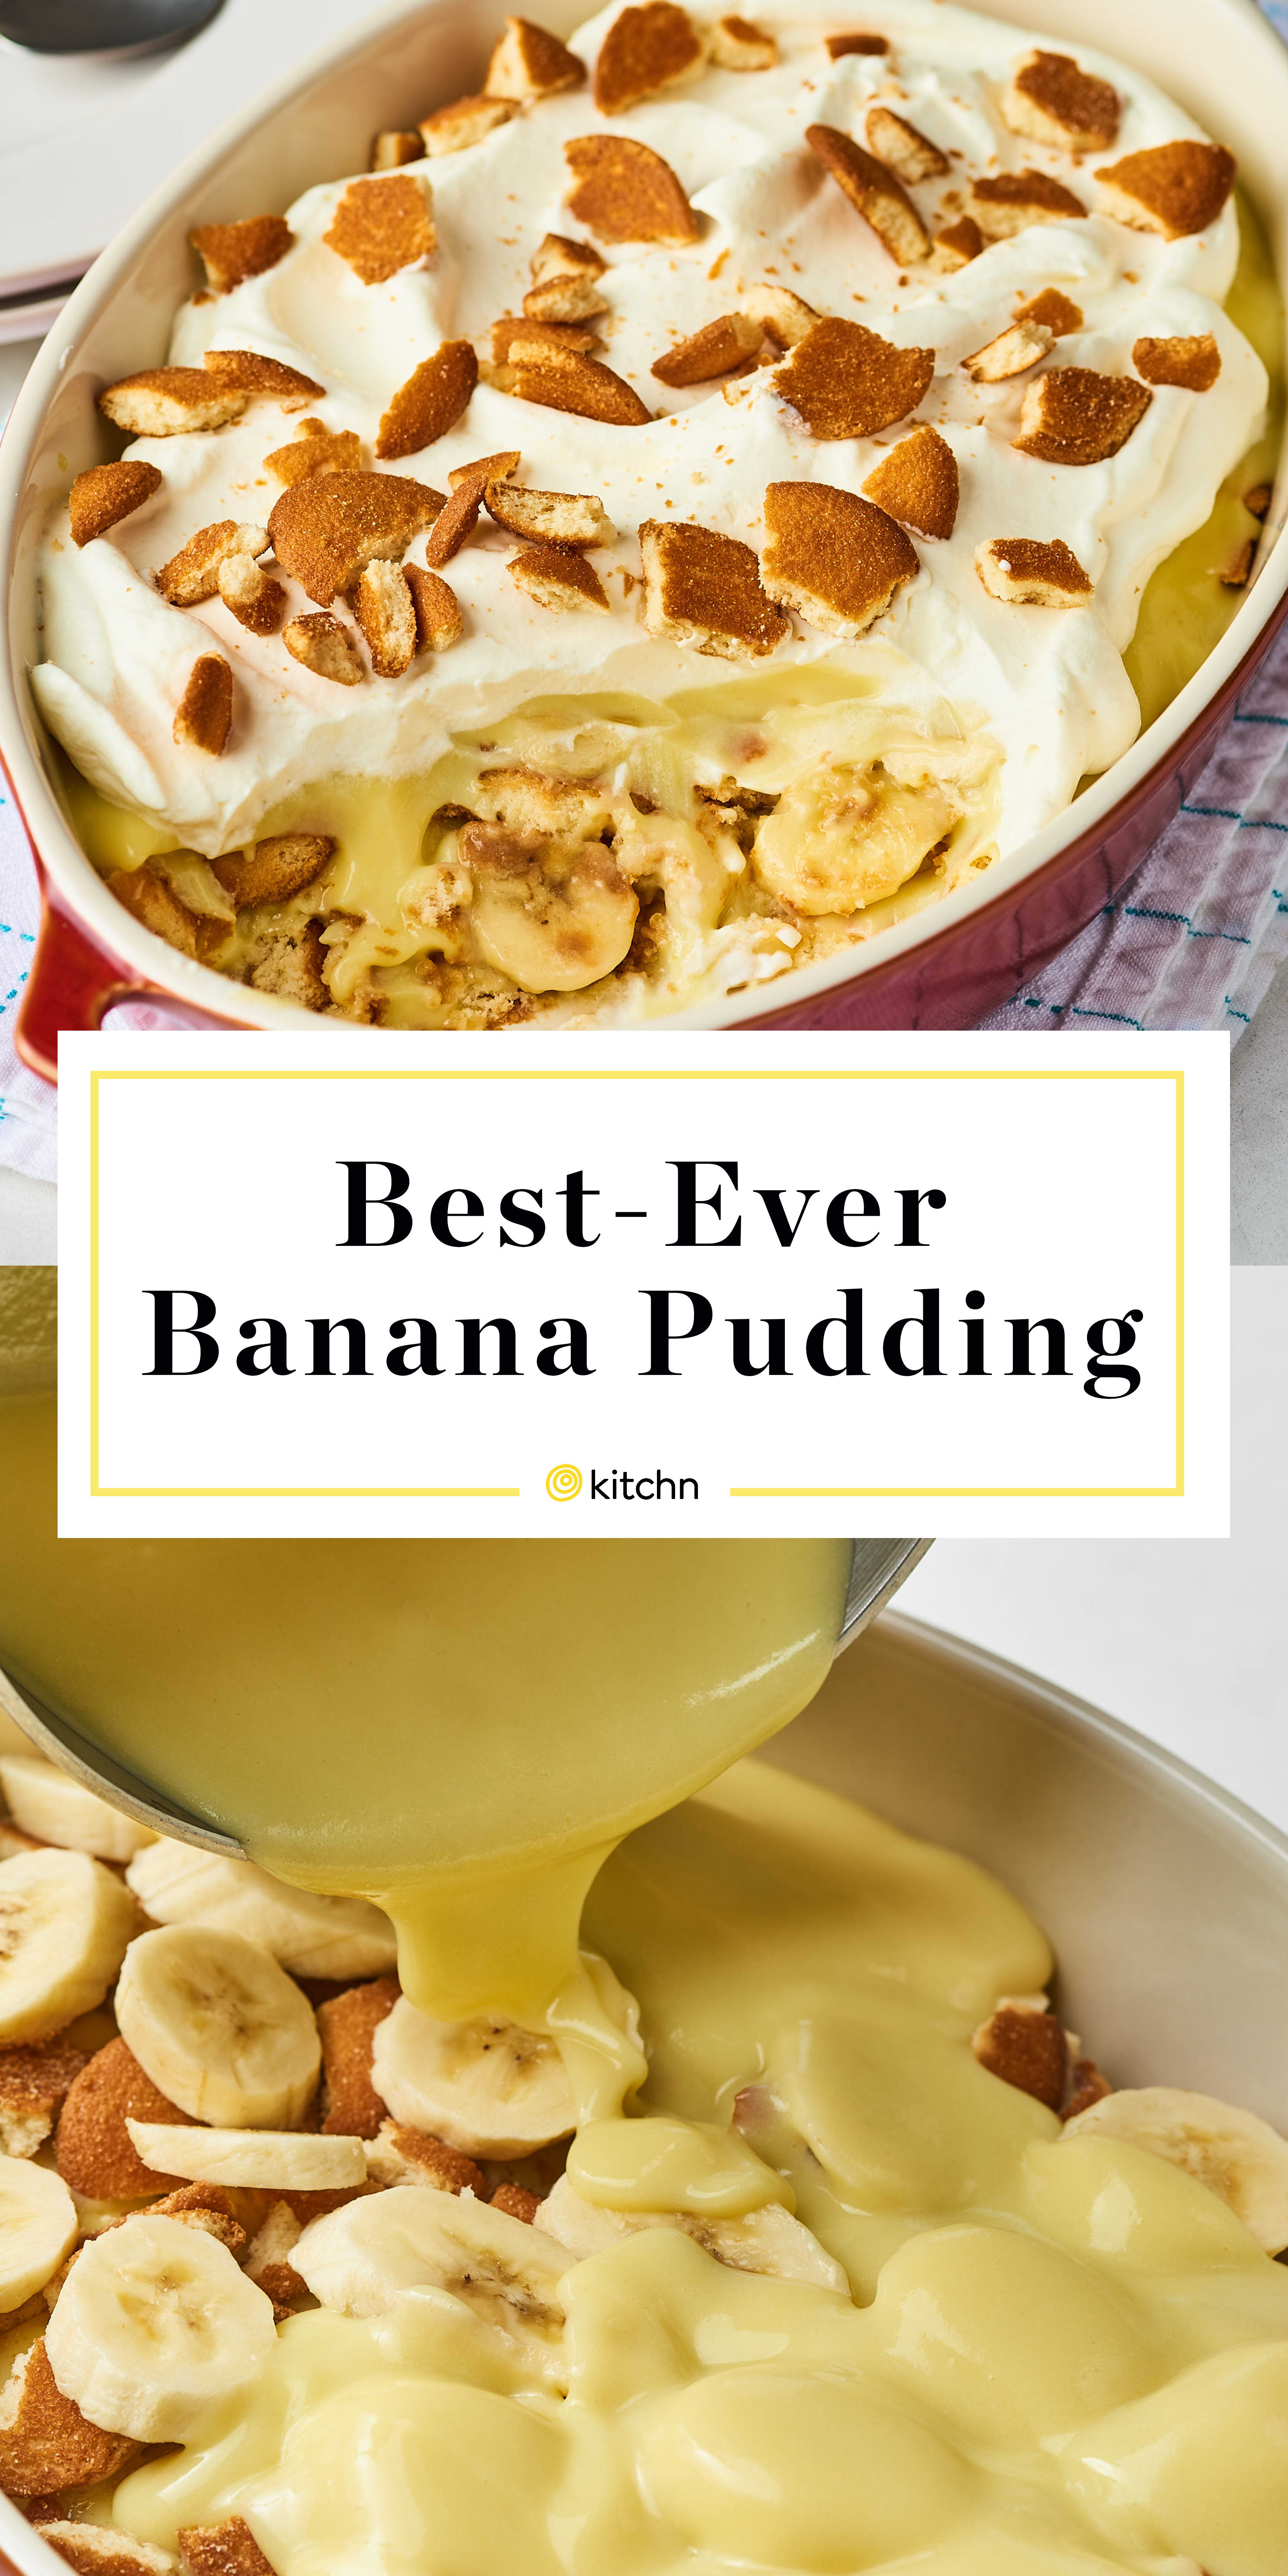 The Best Easy Banana Pudding Kitchn